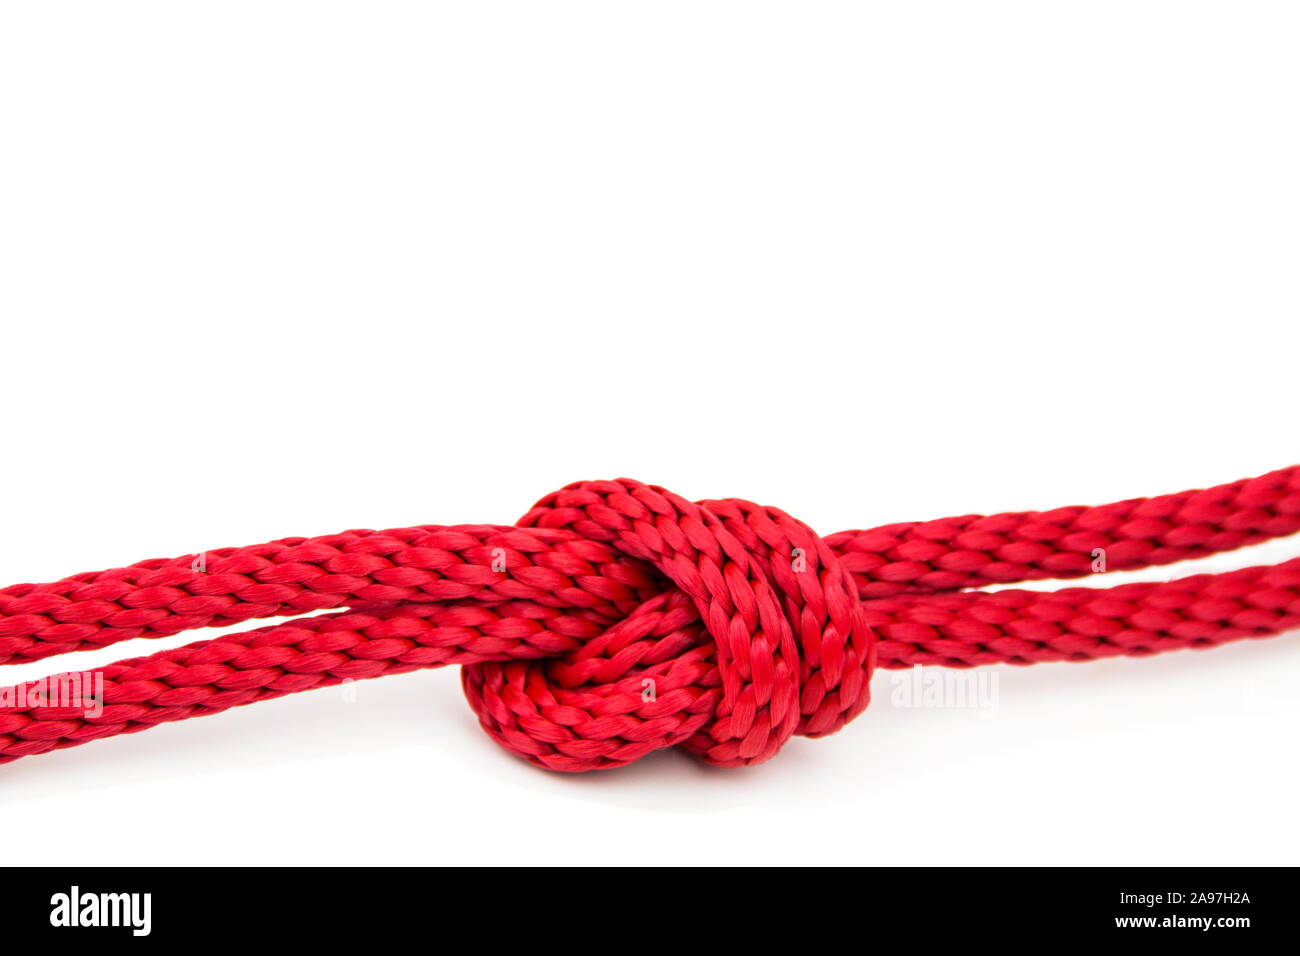 Rede knot against white background Stock Photo